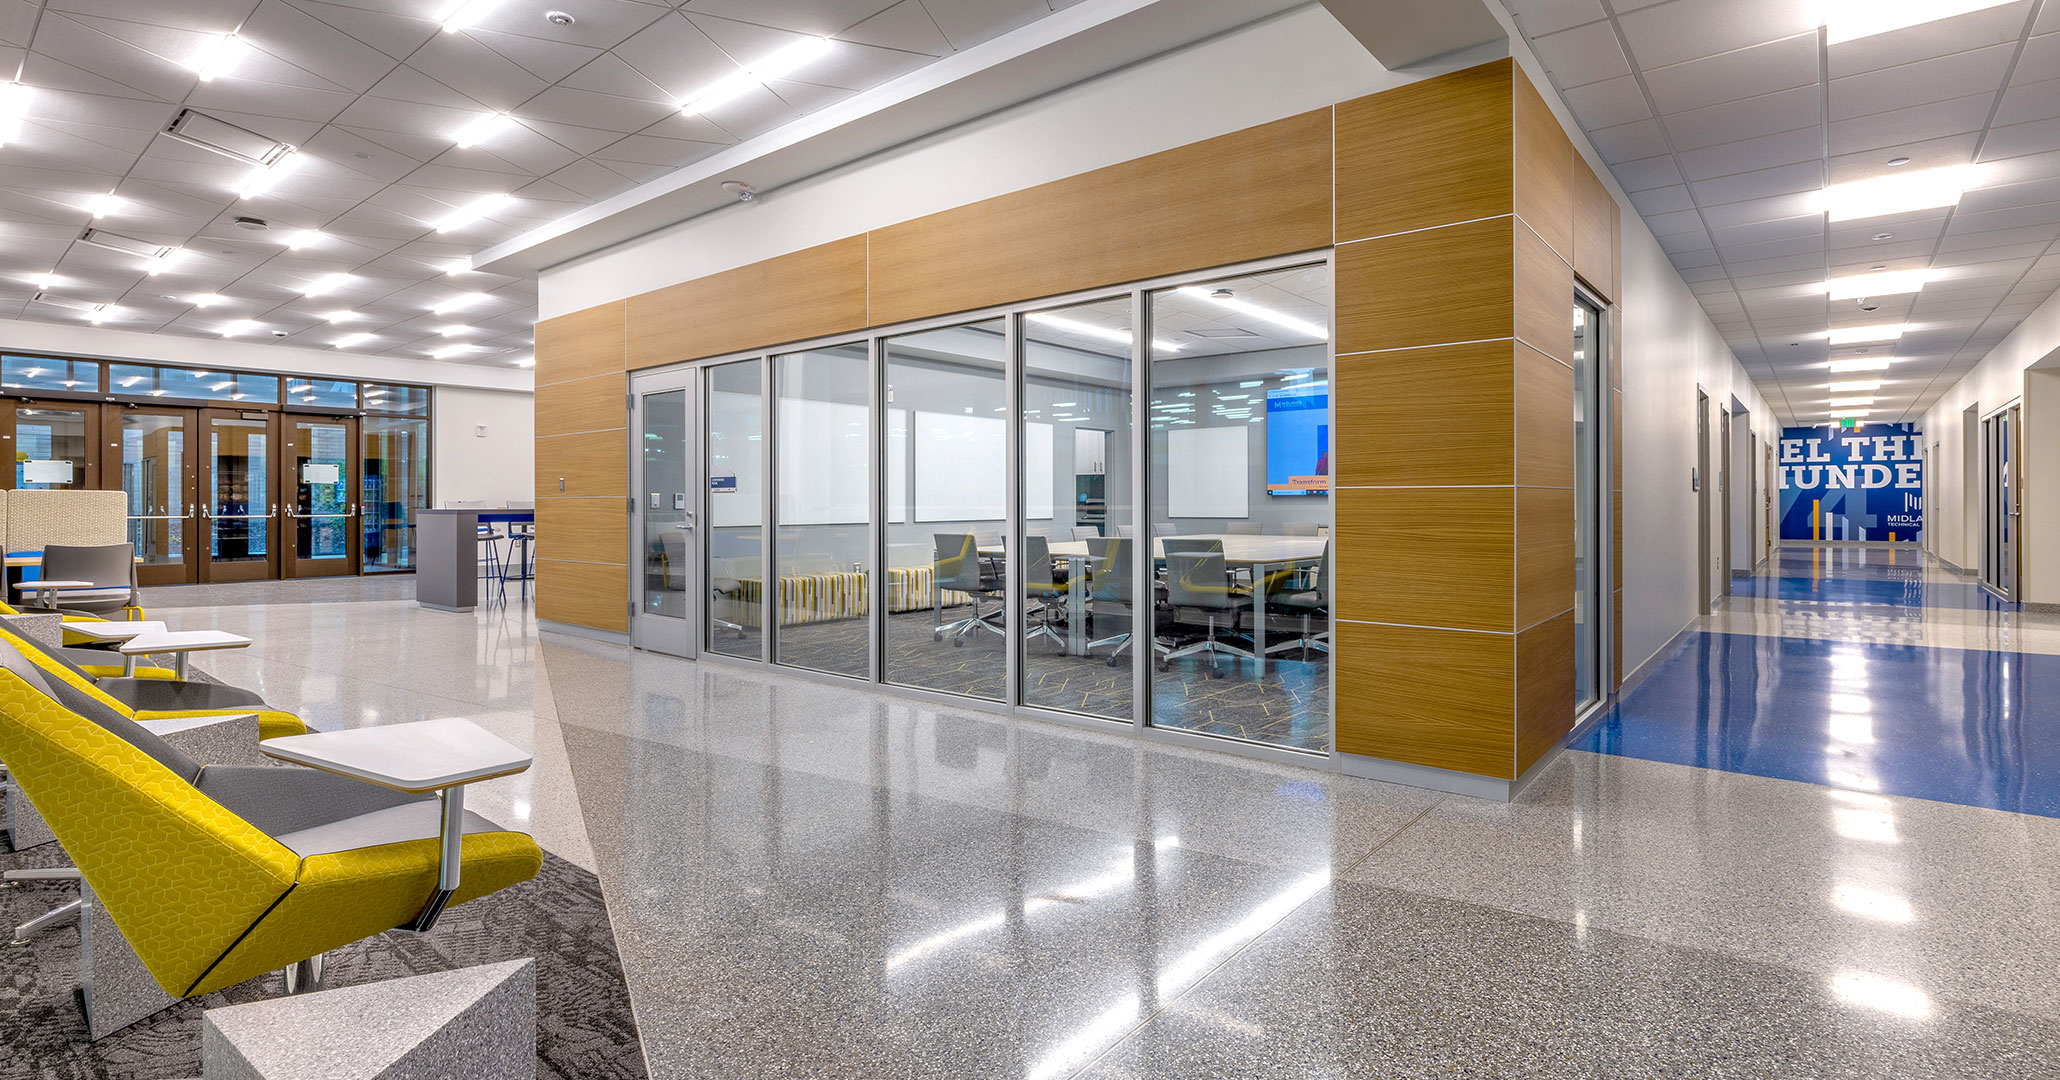 BOUDREAUX architects create modern spaces for faculty to meet and students to congregate